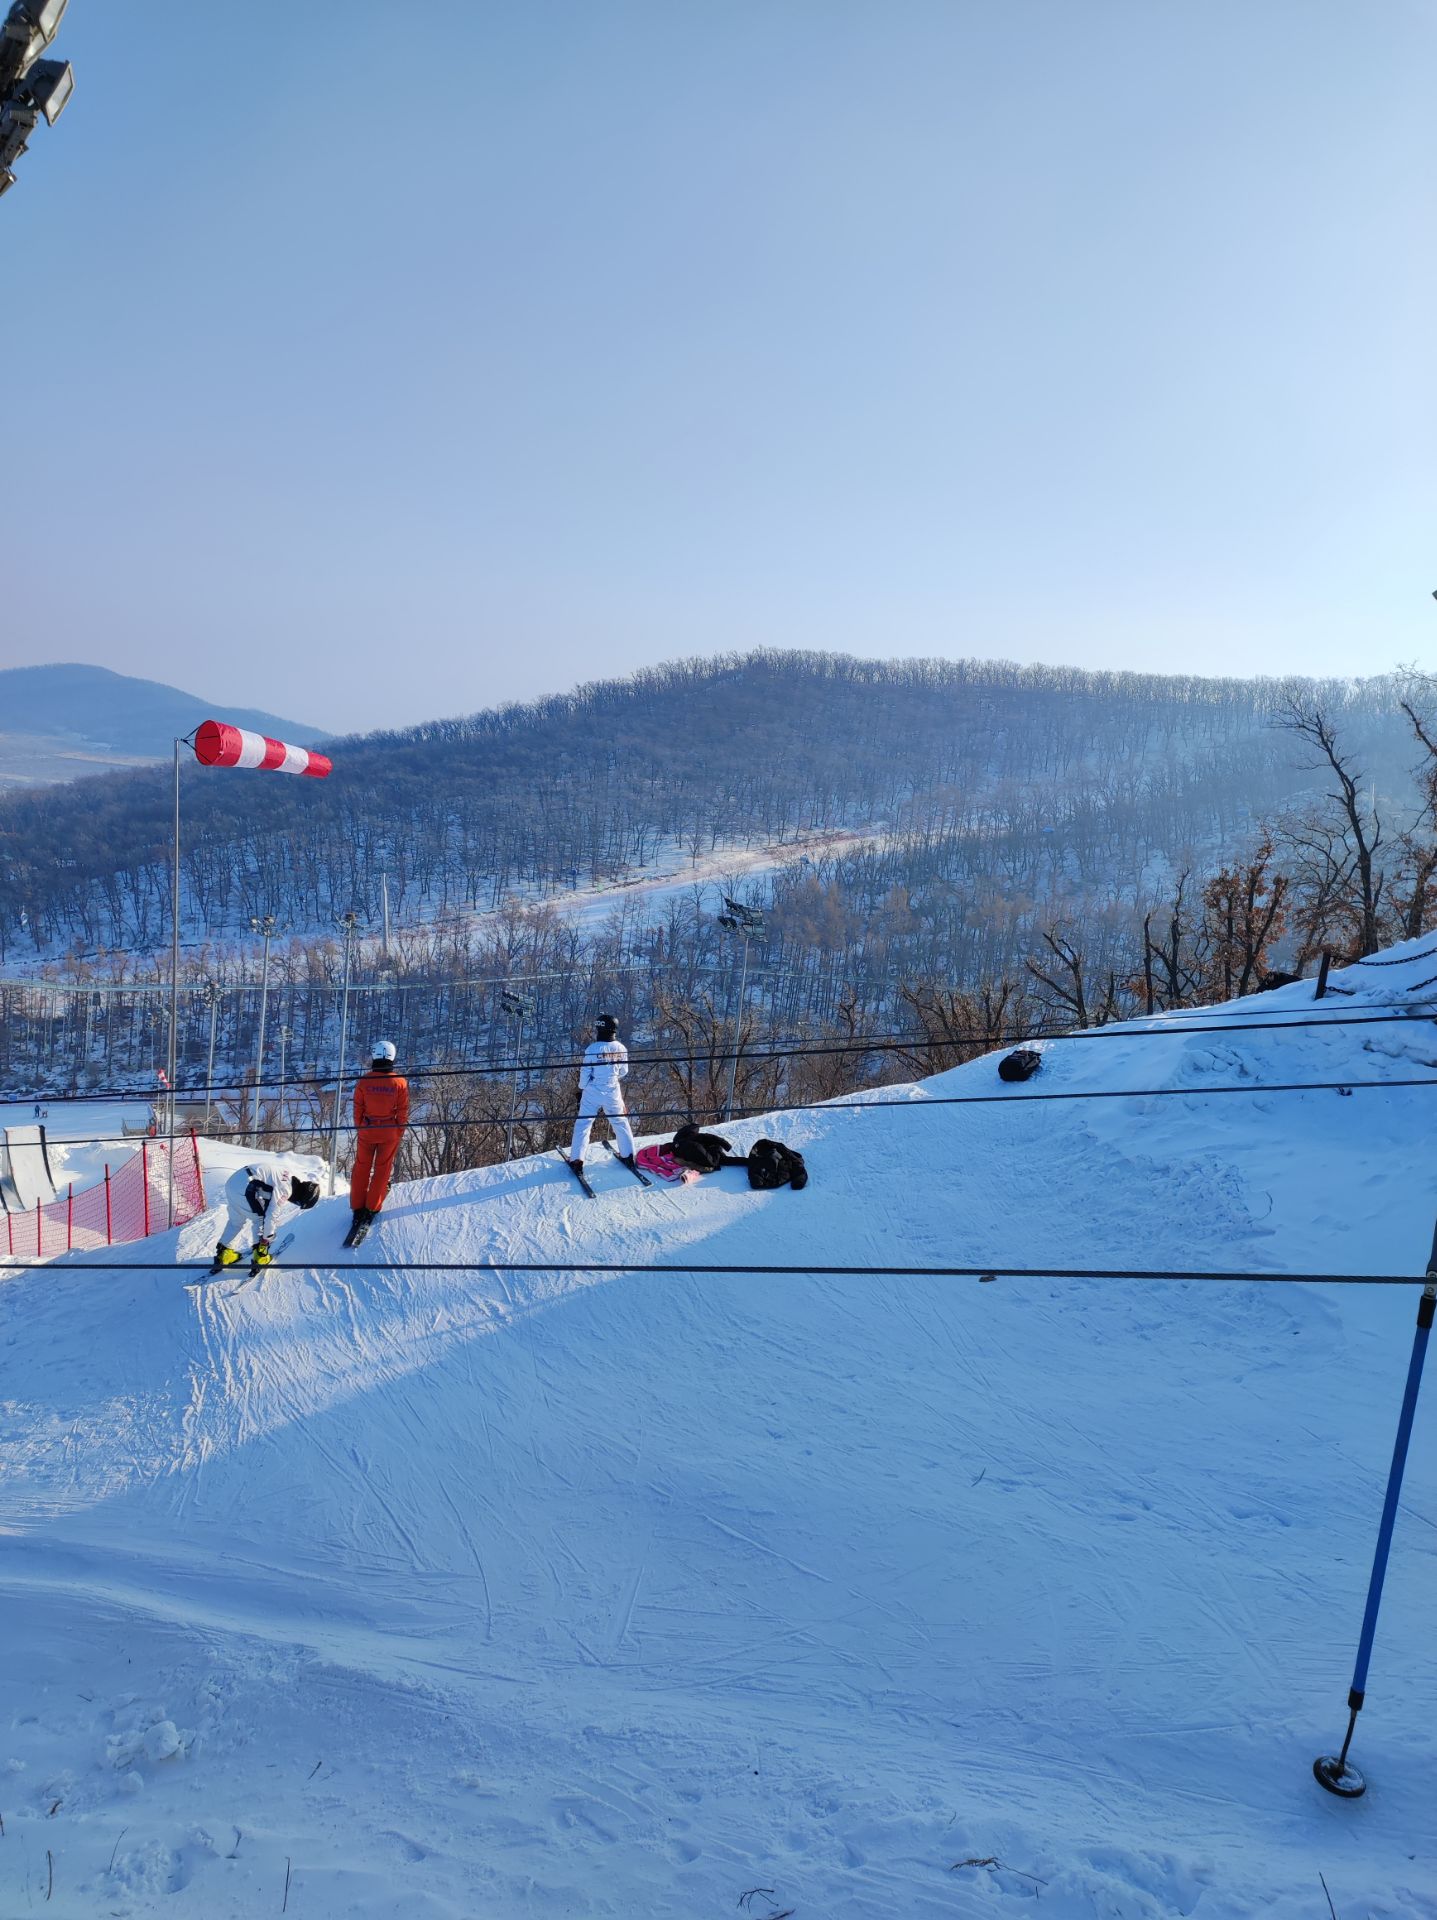 Lotus Hill Ski Resort attraction reviews - Lotus Hill Ski Resort tickets -  Lotus Hill Ski Resort discounts - Lotus Hill Ski Resort transportation,  address, opening hours - attractions, hotels, and food